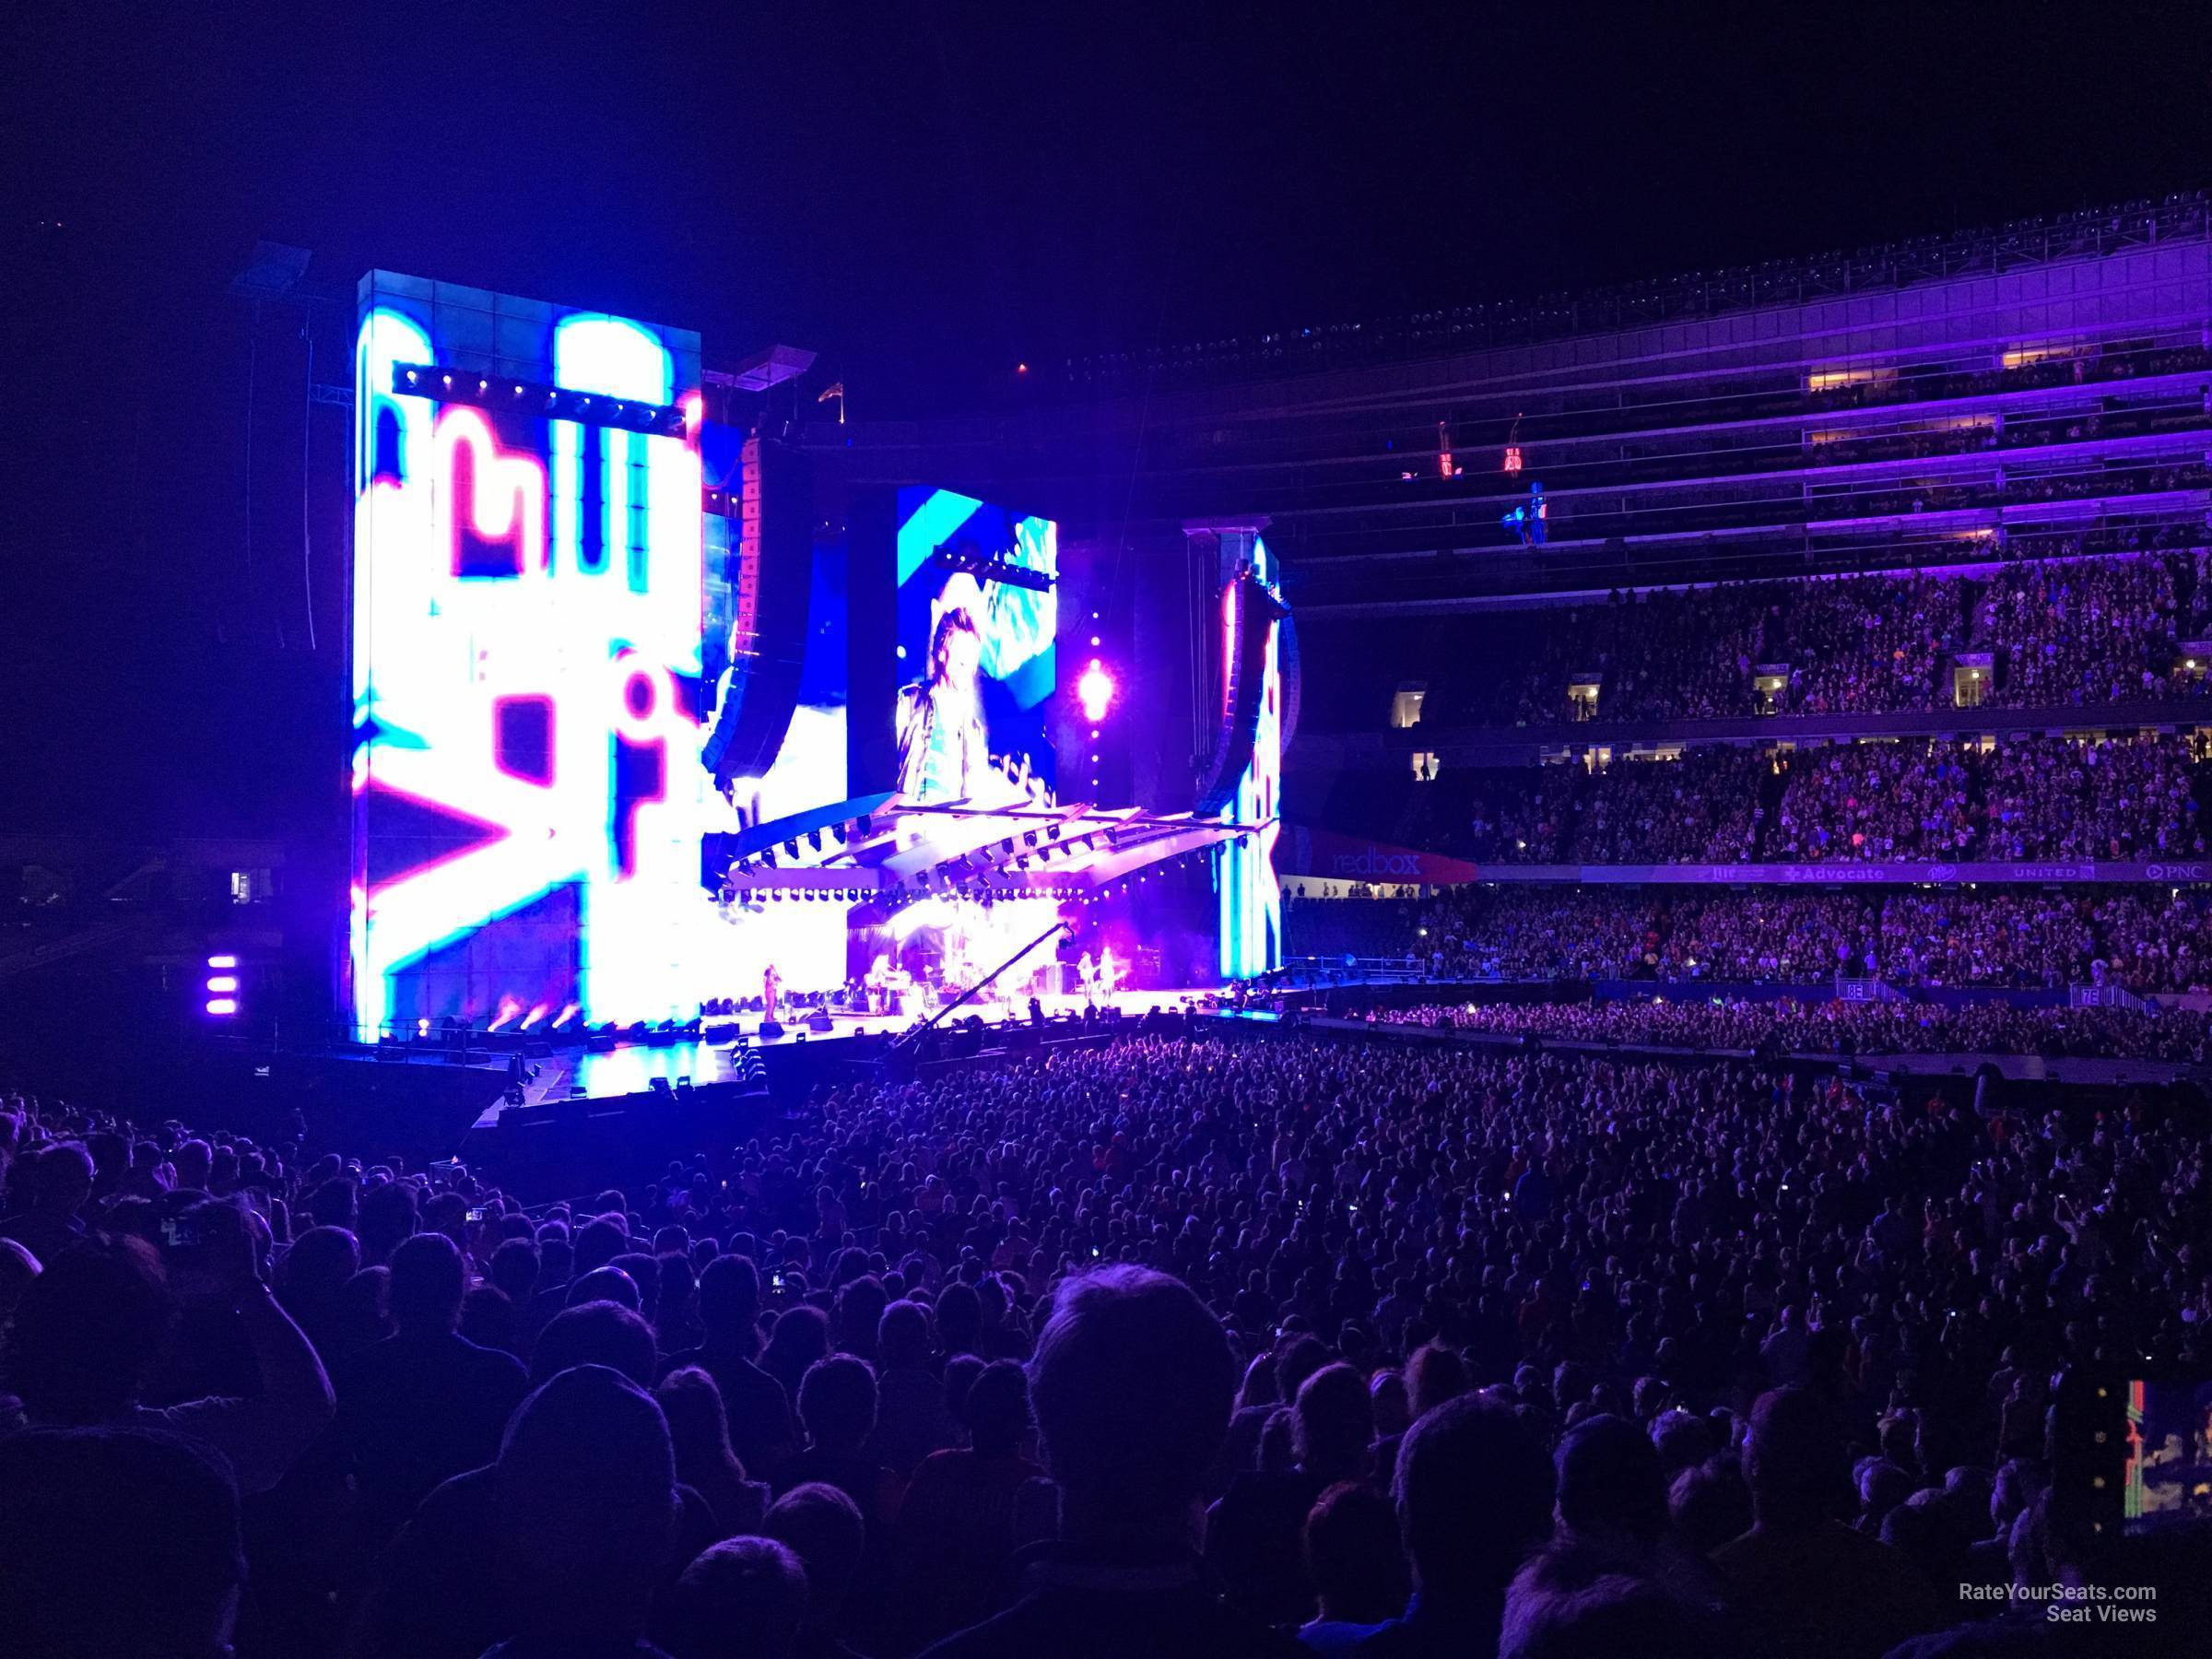 section 138, row 19 seat view  for concert - soldier field